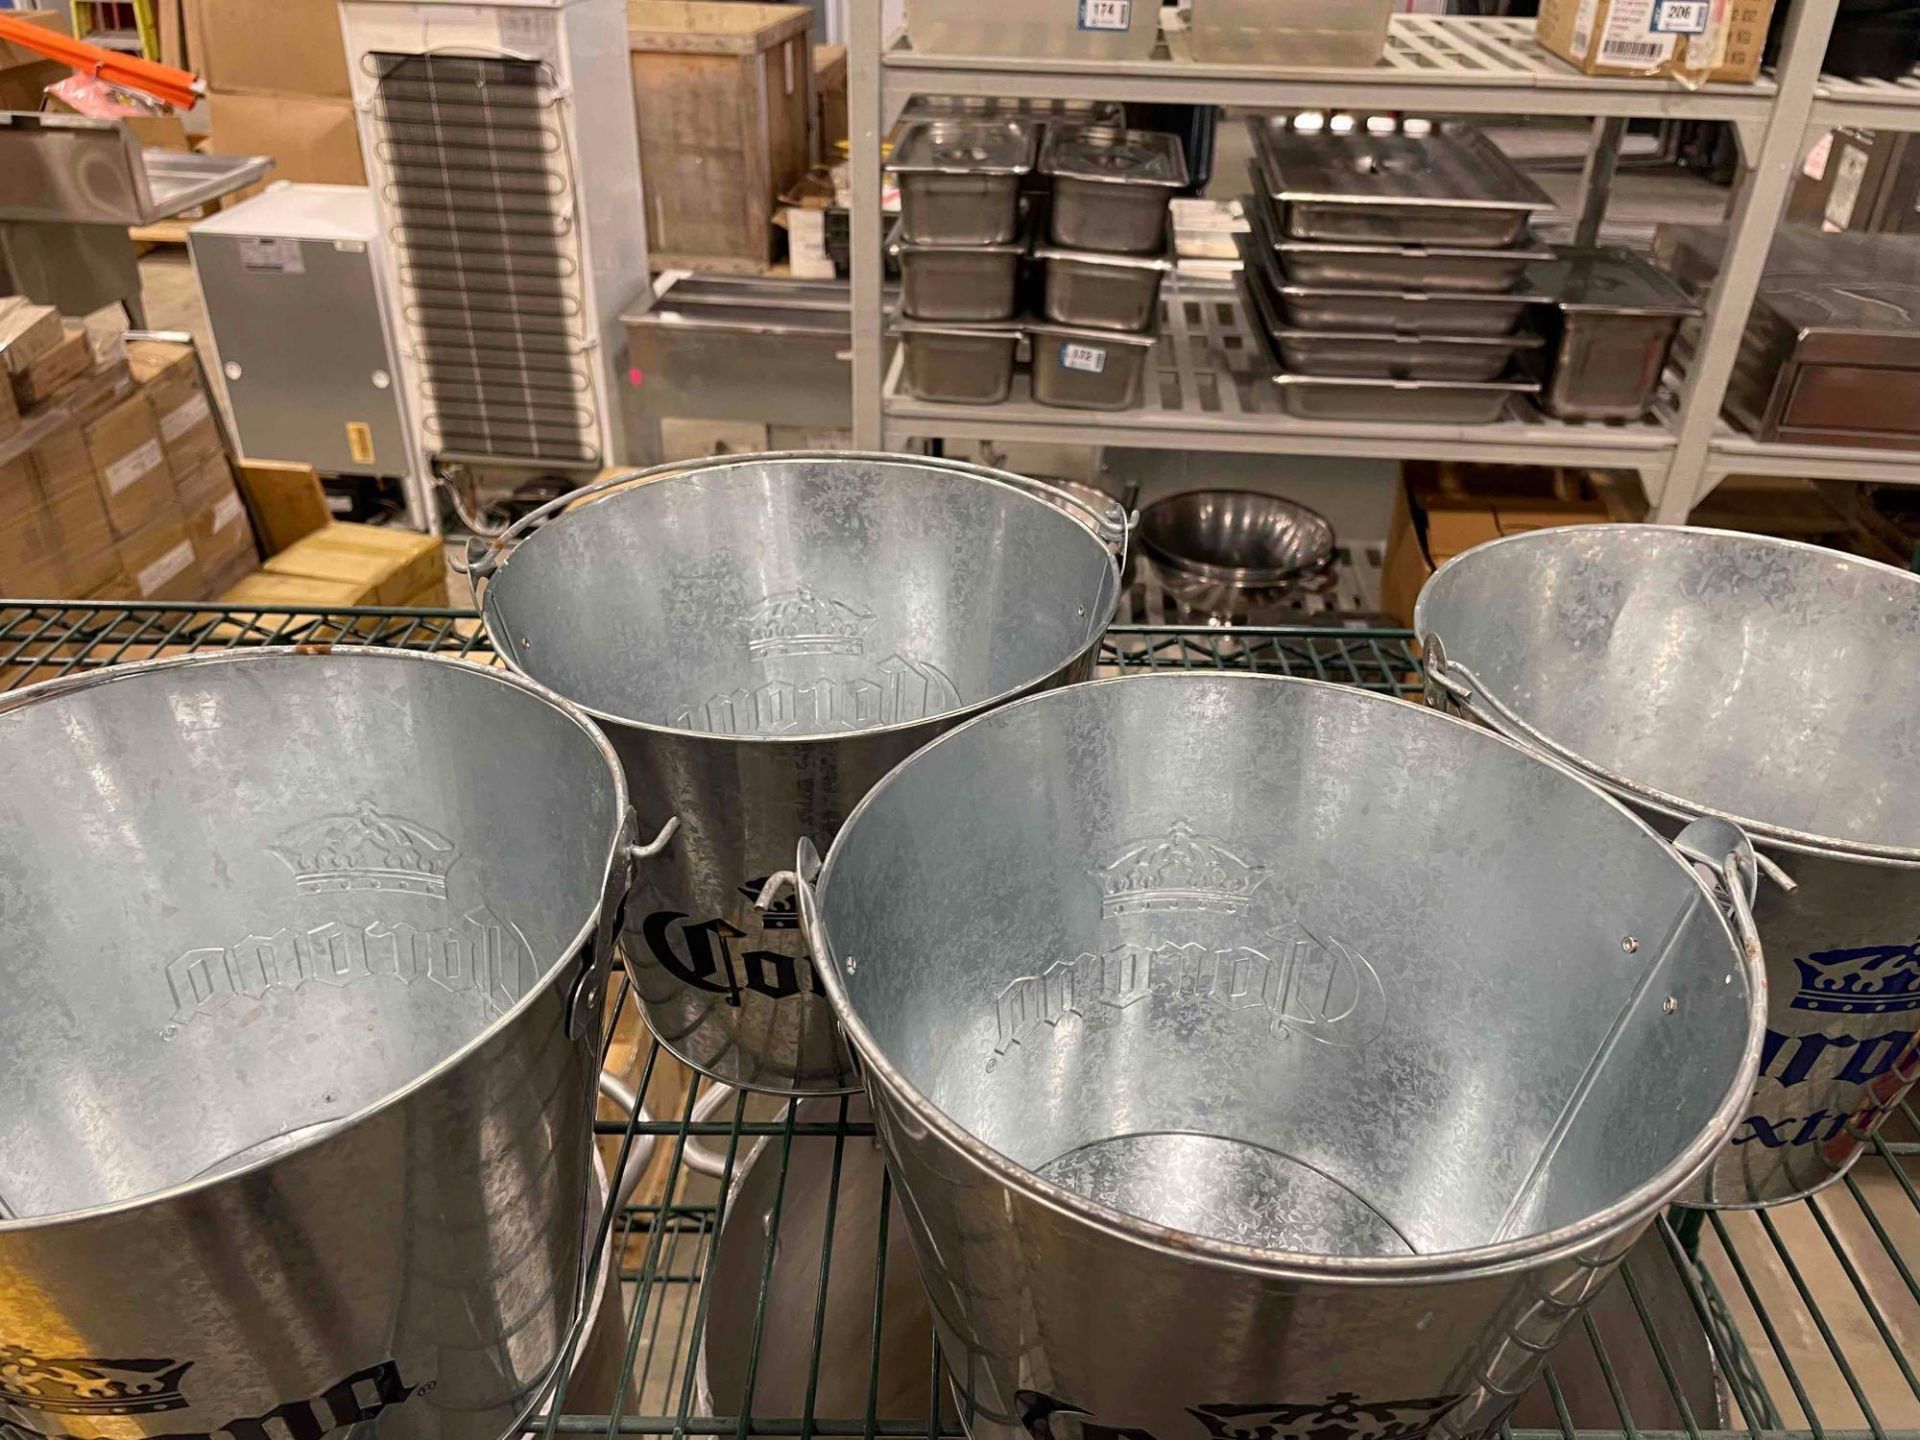 (4) CORONA EXTRA BRANDED METAL PAILS - Image 2 of 3